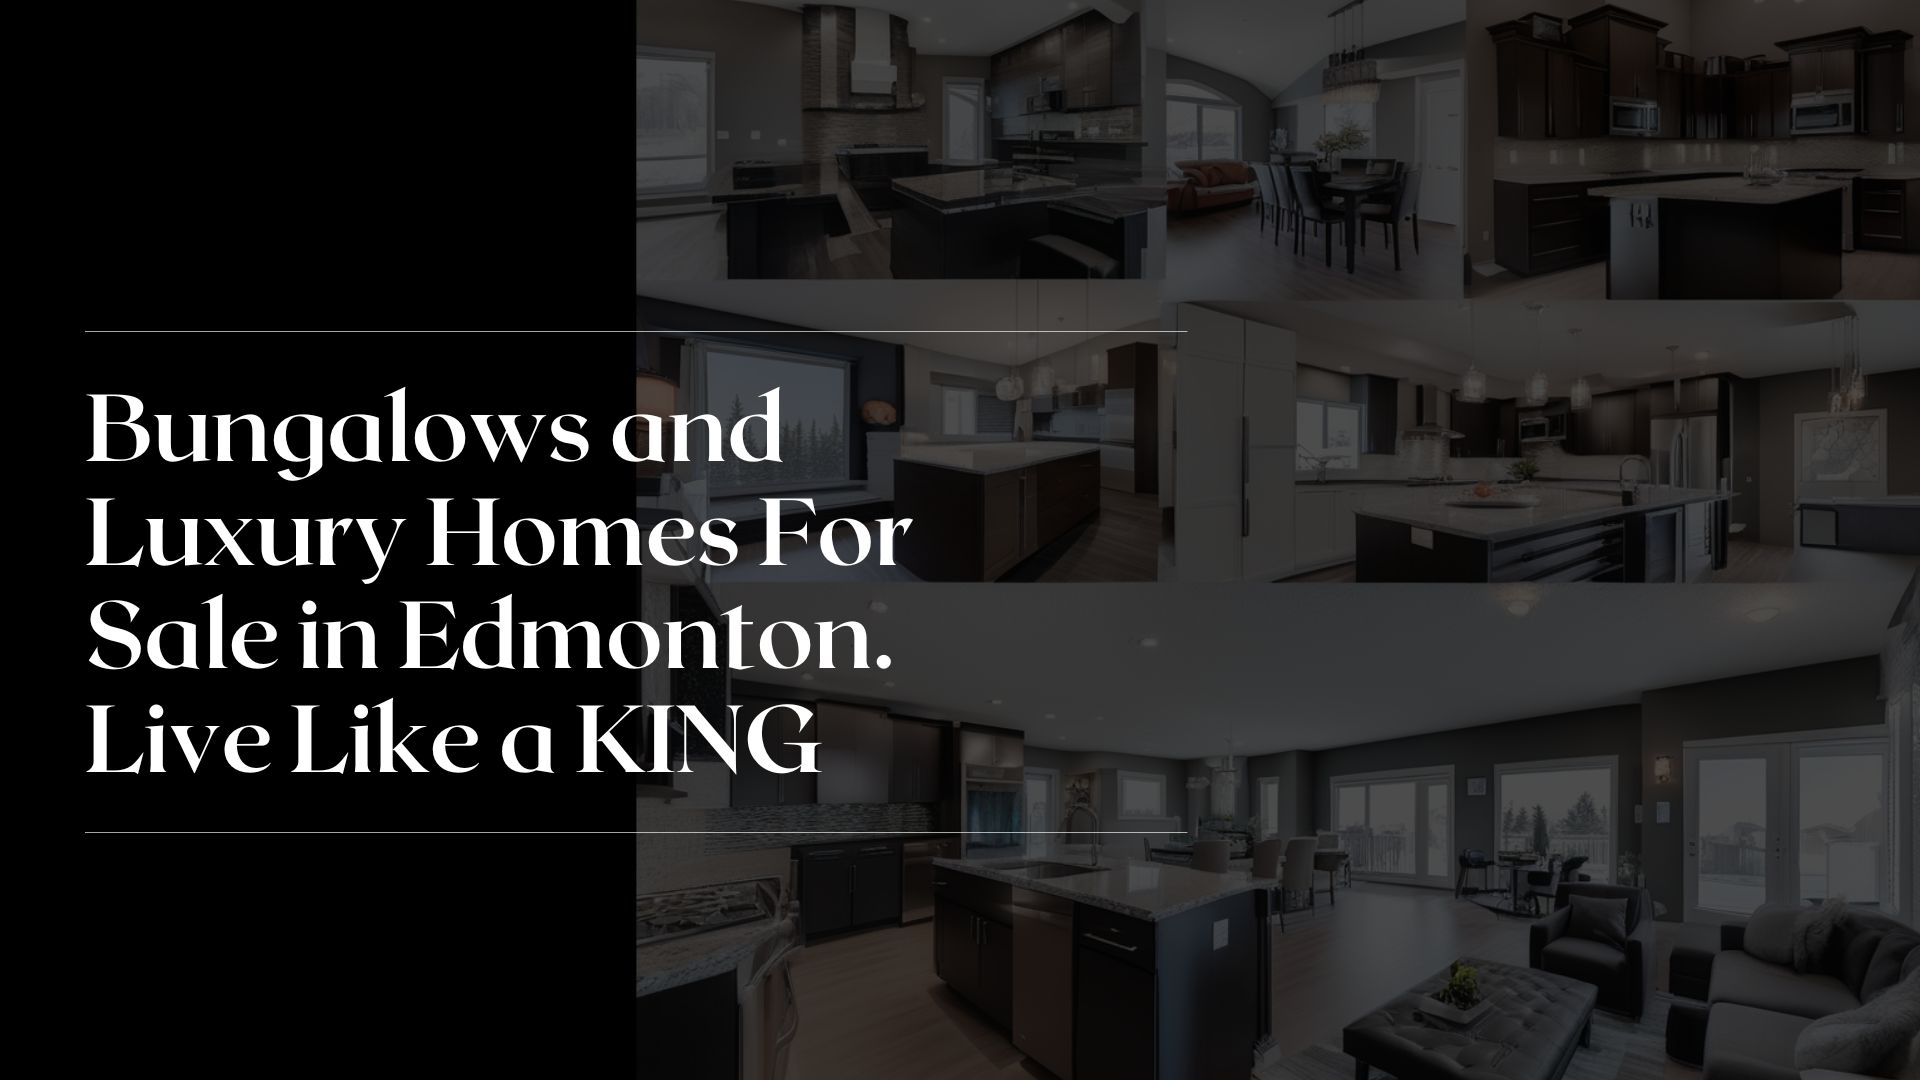 Bungalows and Luxury Homes For Sale in Edmonton. Live Like a KING